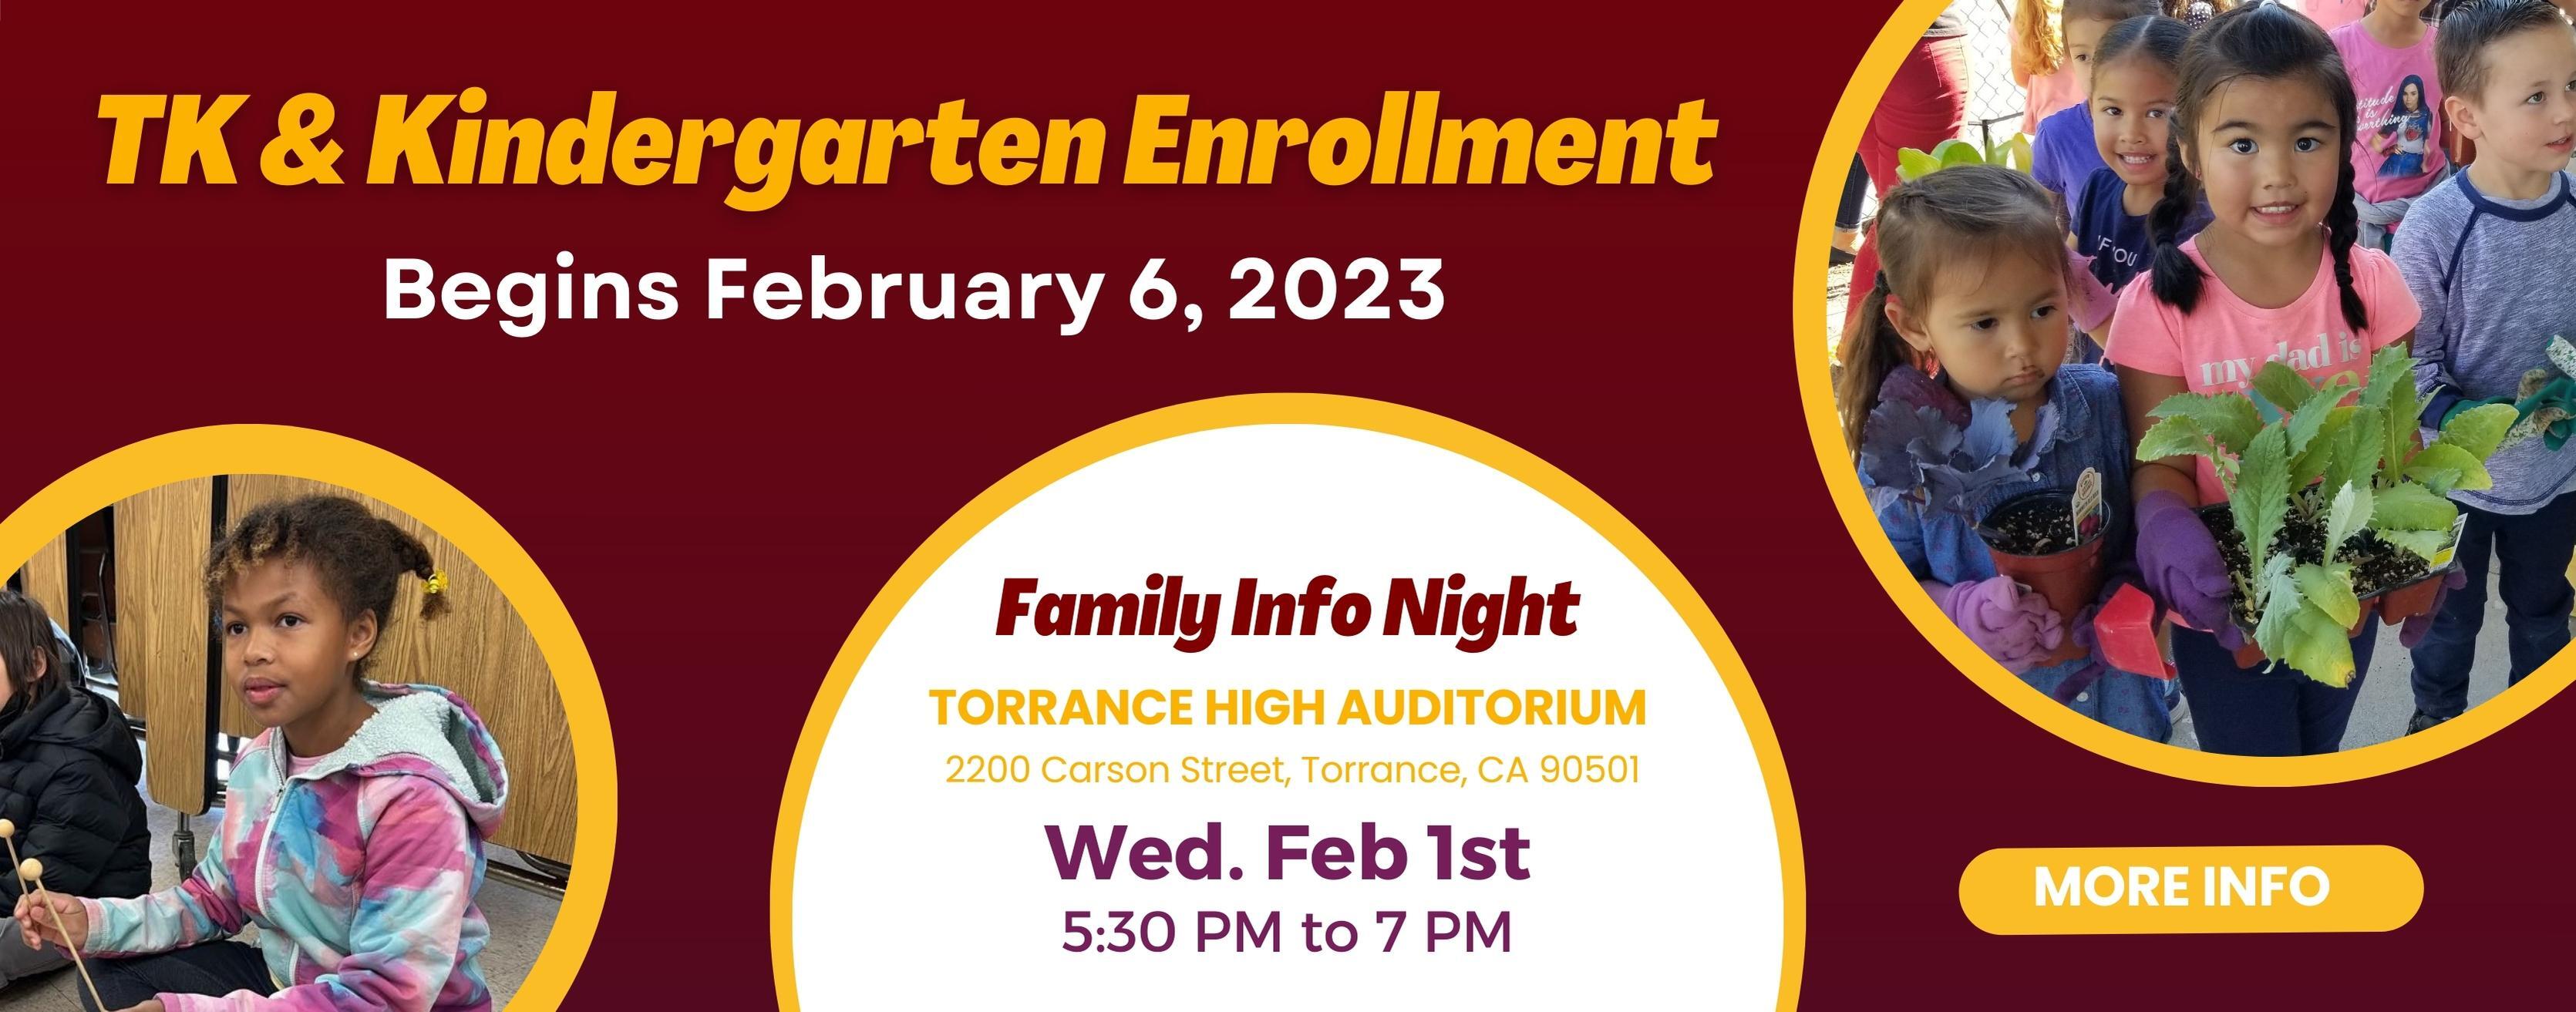 Central Area Family Info Night